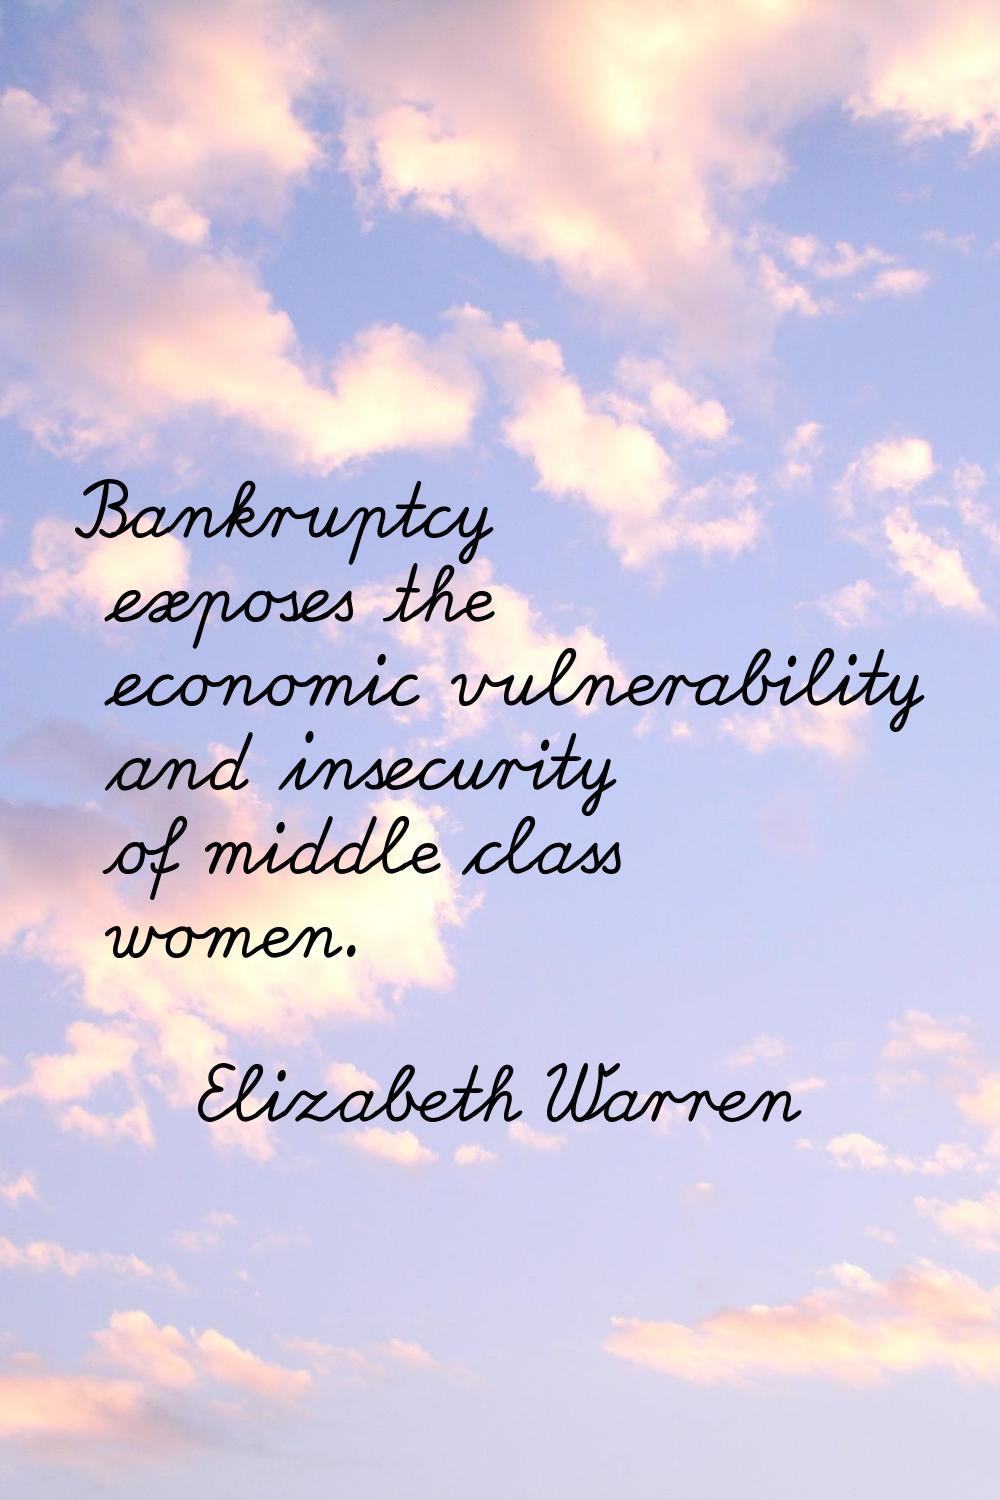 Bankruptcy exposes the economic vulnerability and insecurity of middle class women.